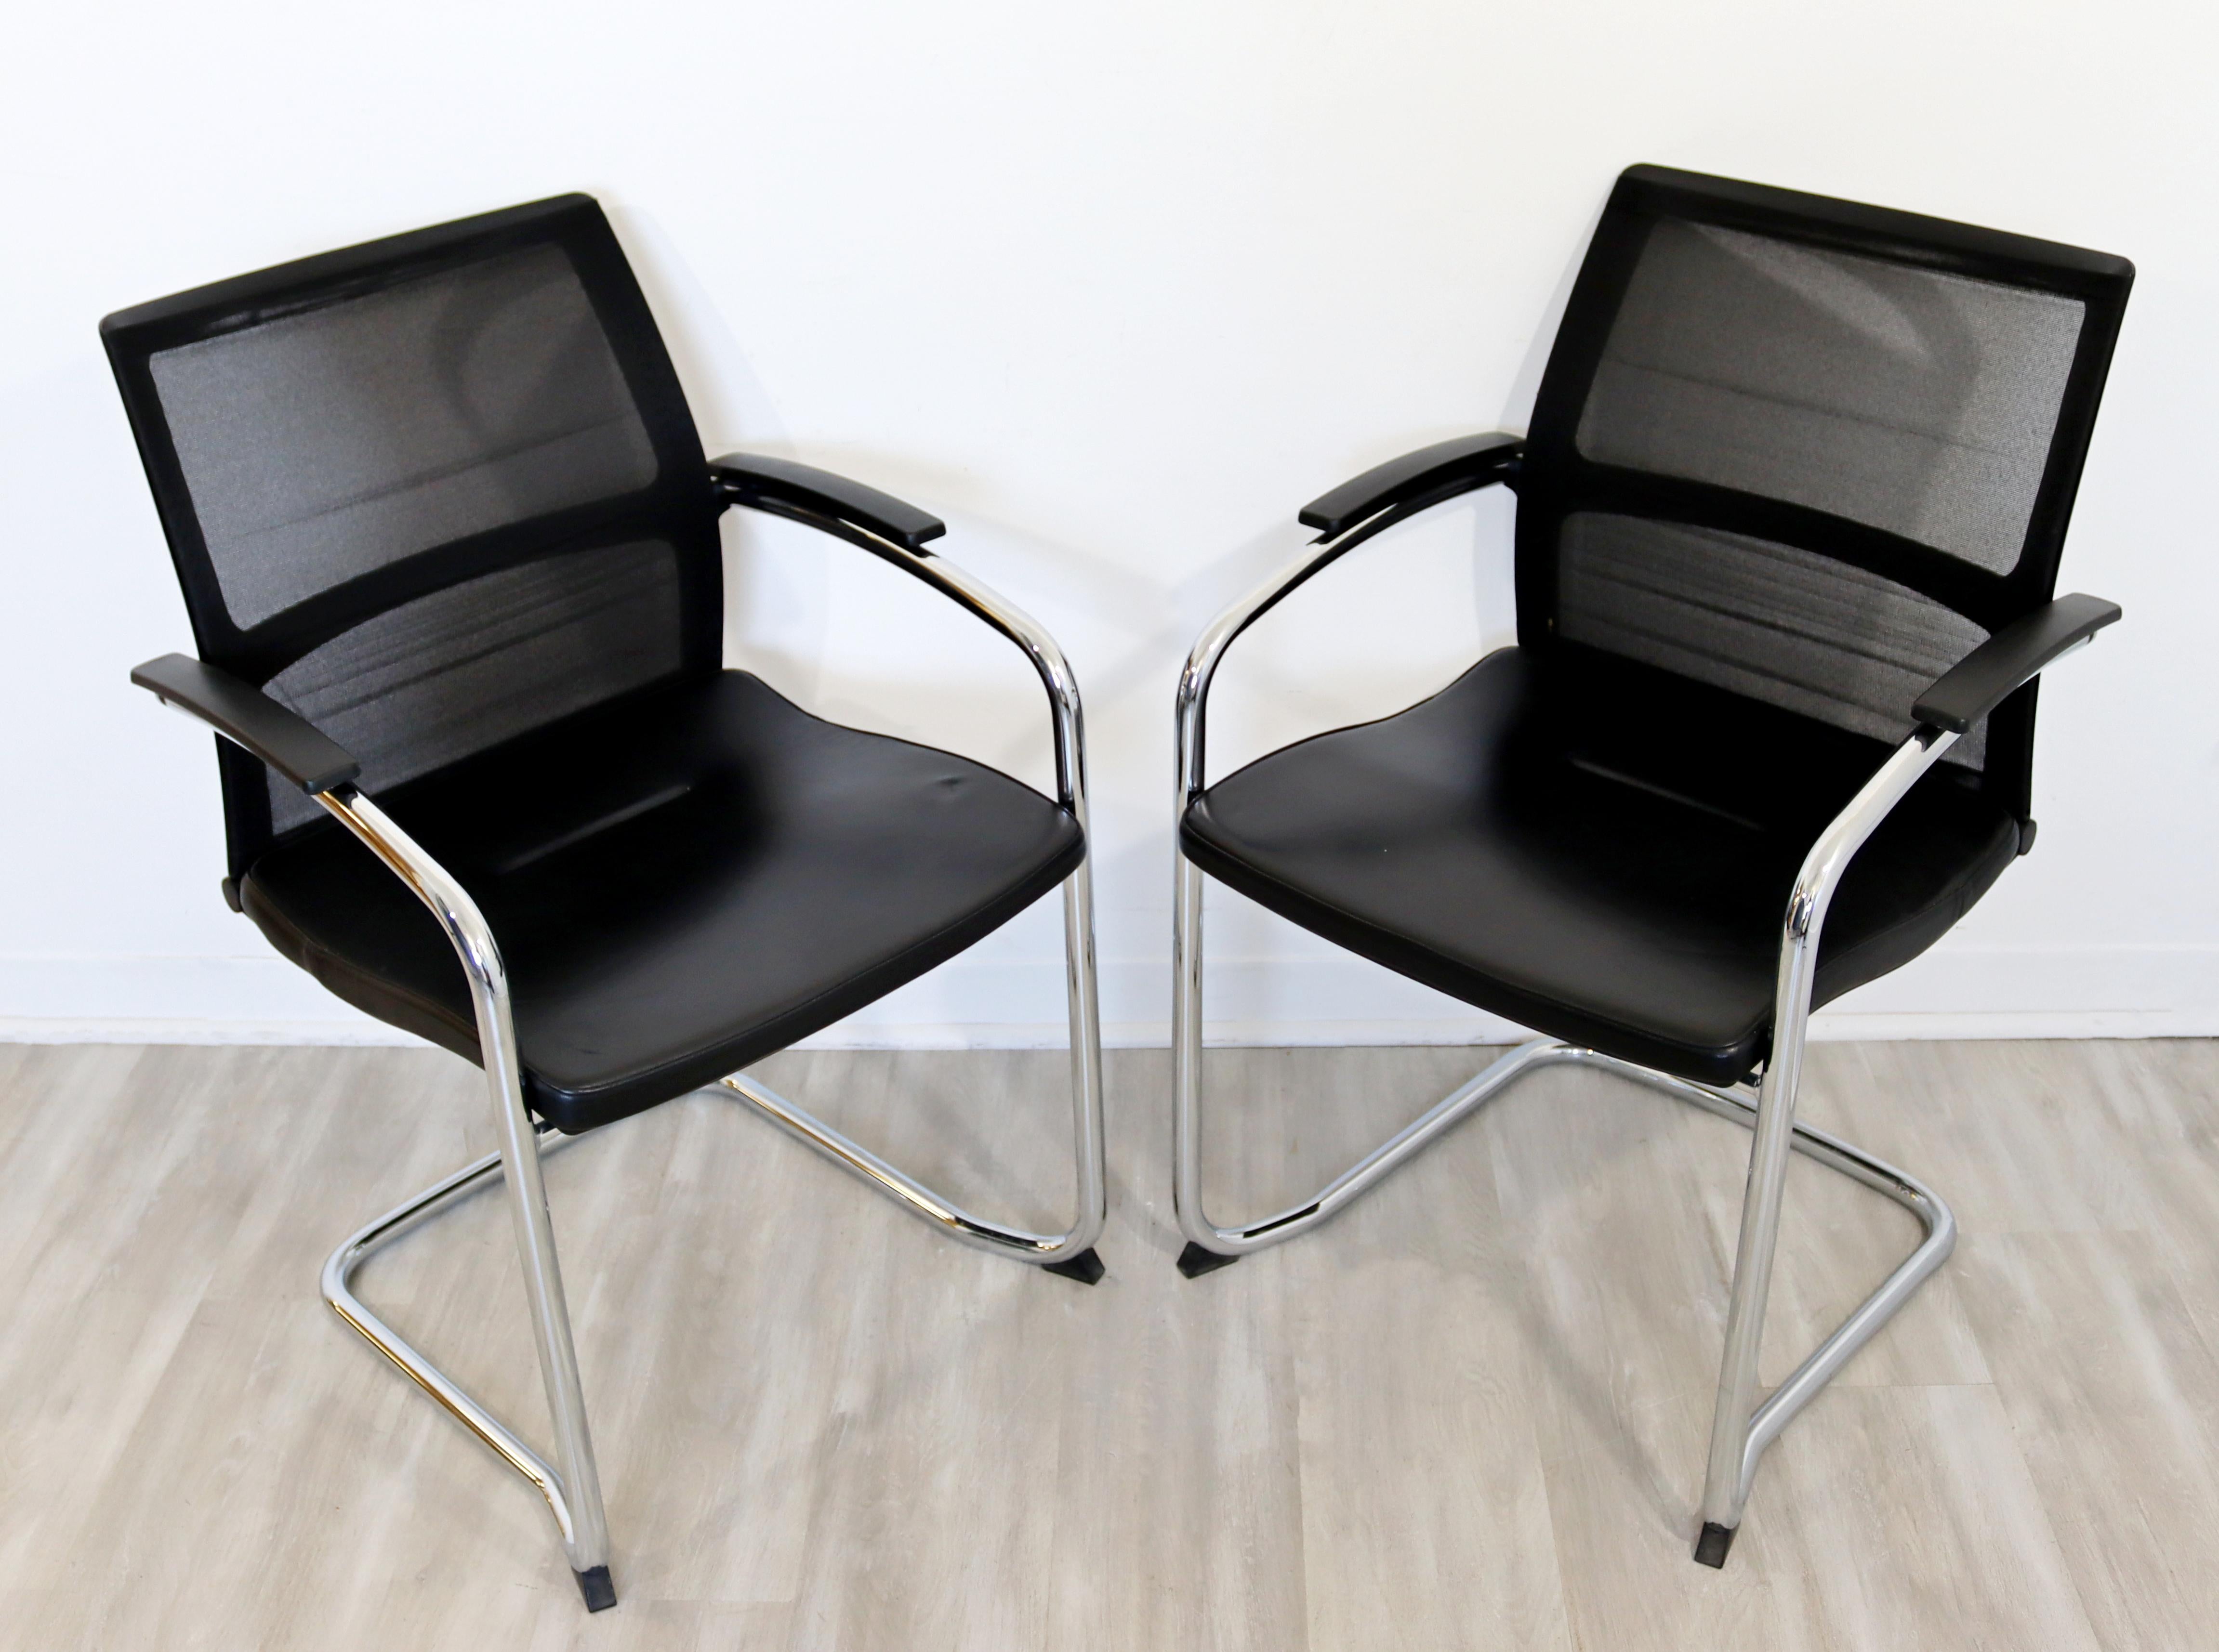 For your consideration is a stunning pair of Knoll dining or office chairs, on cantilever chrome bases, circa 2007. In excellent condition. The dimensions are 22.5